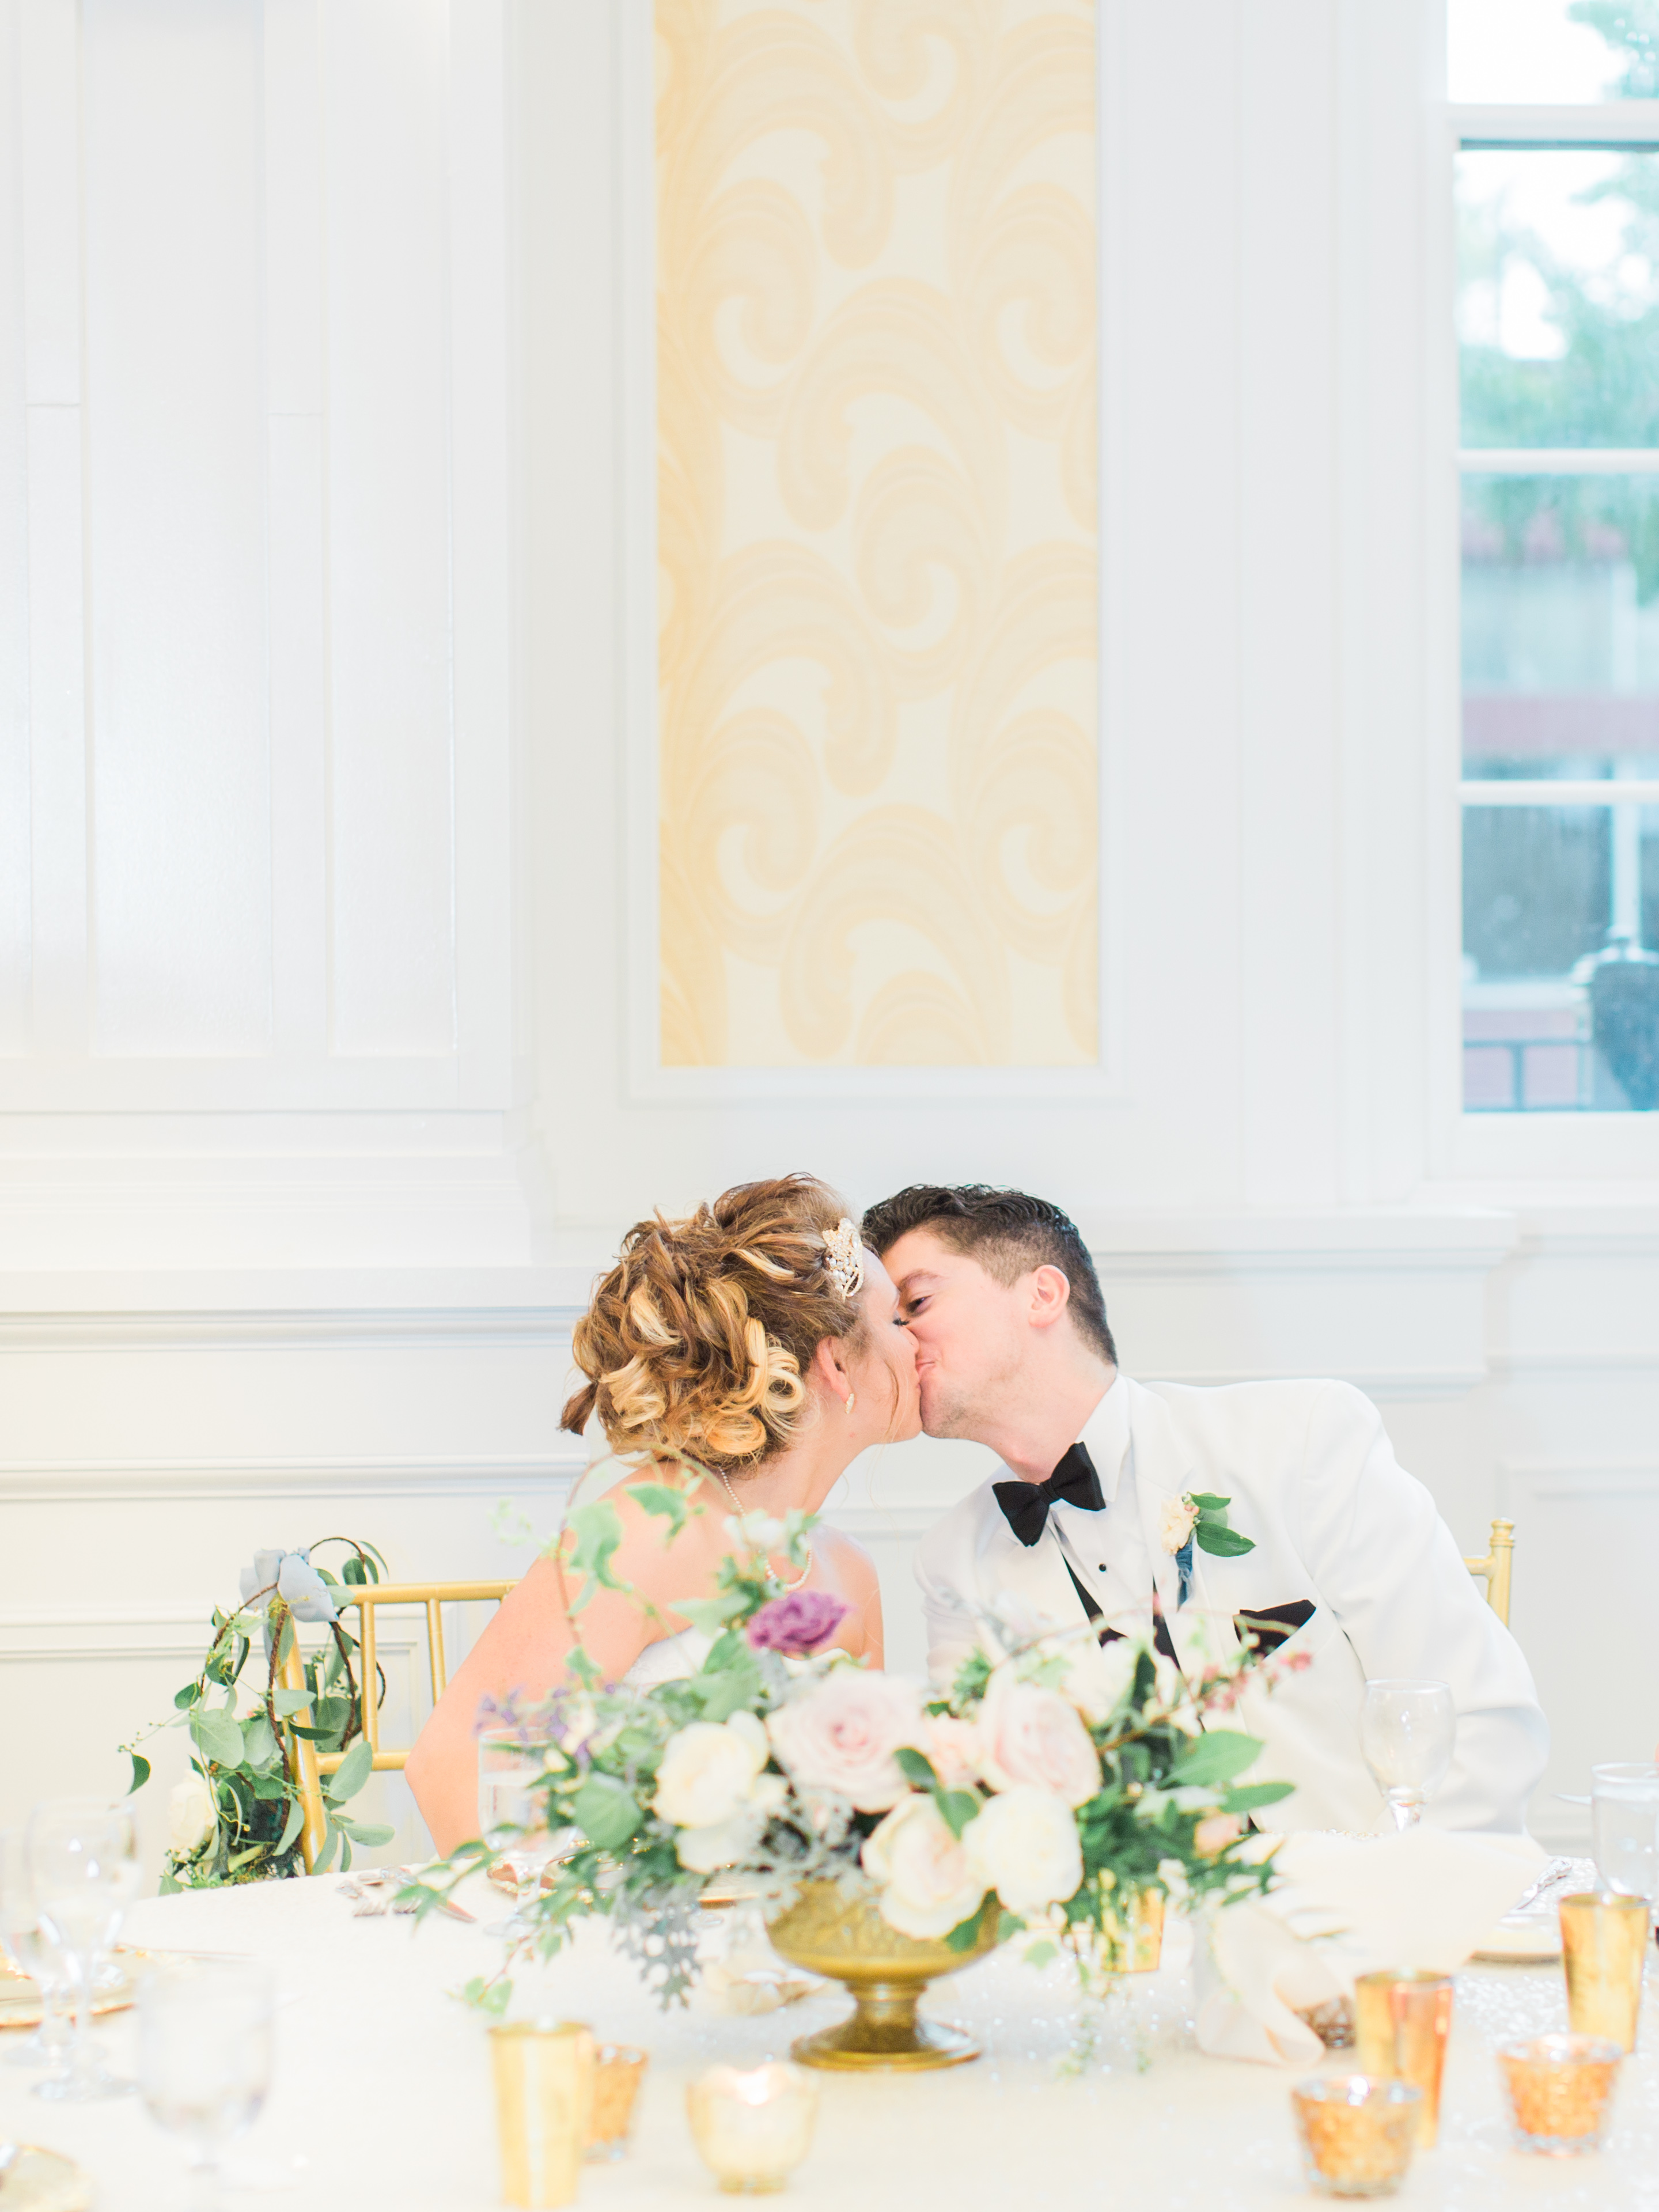 The Durant Wedding | The Day's Design | Samantha James Photography